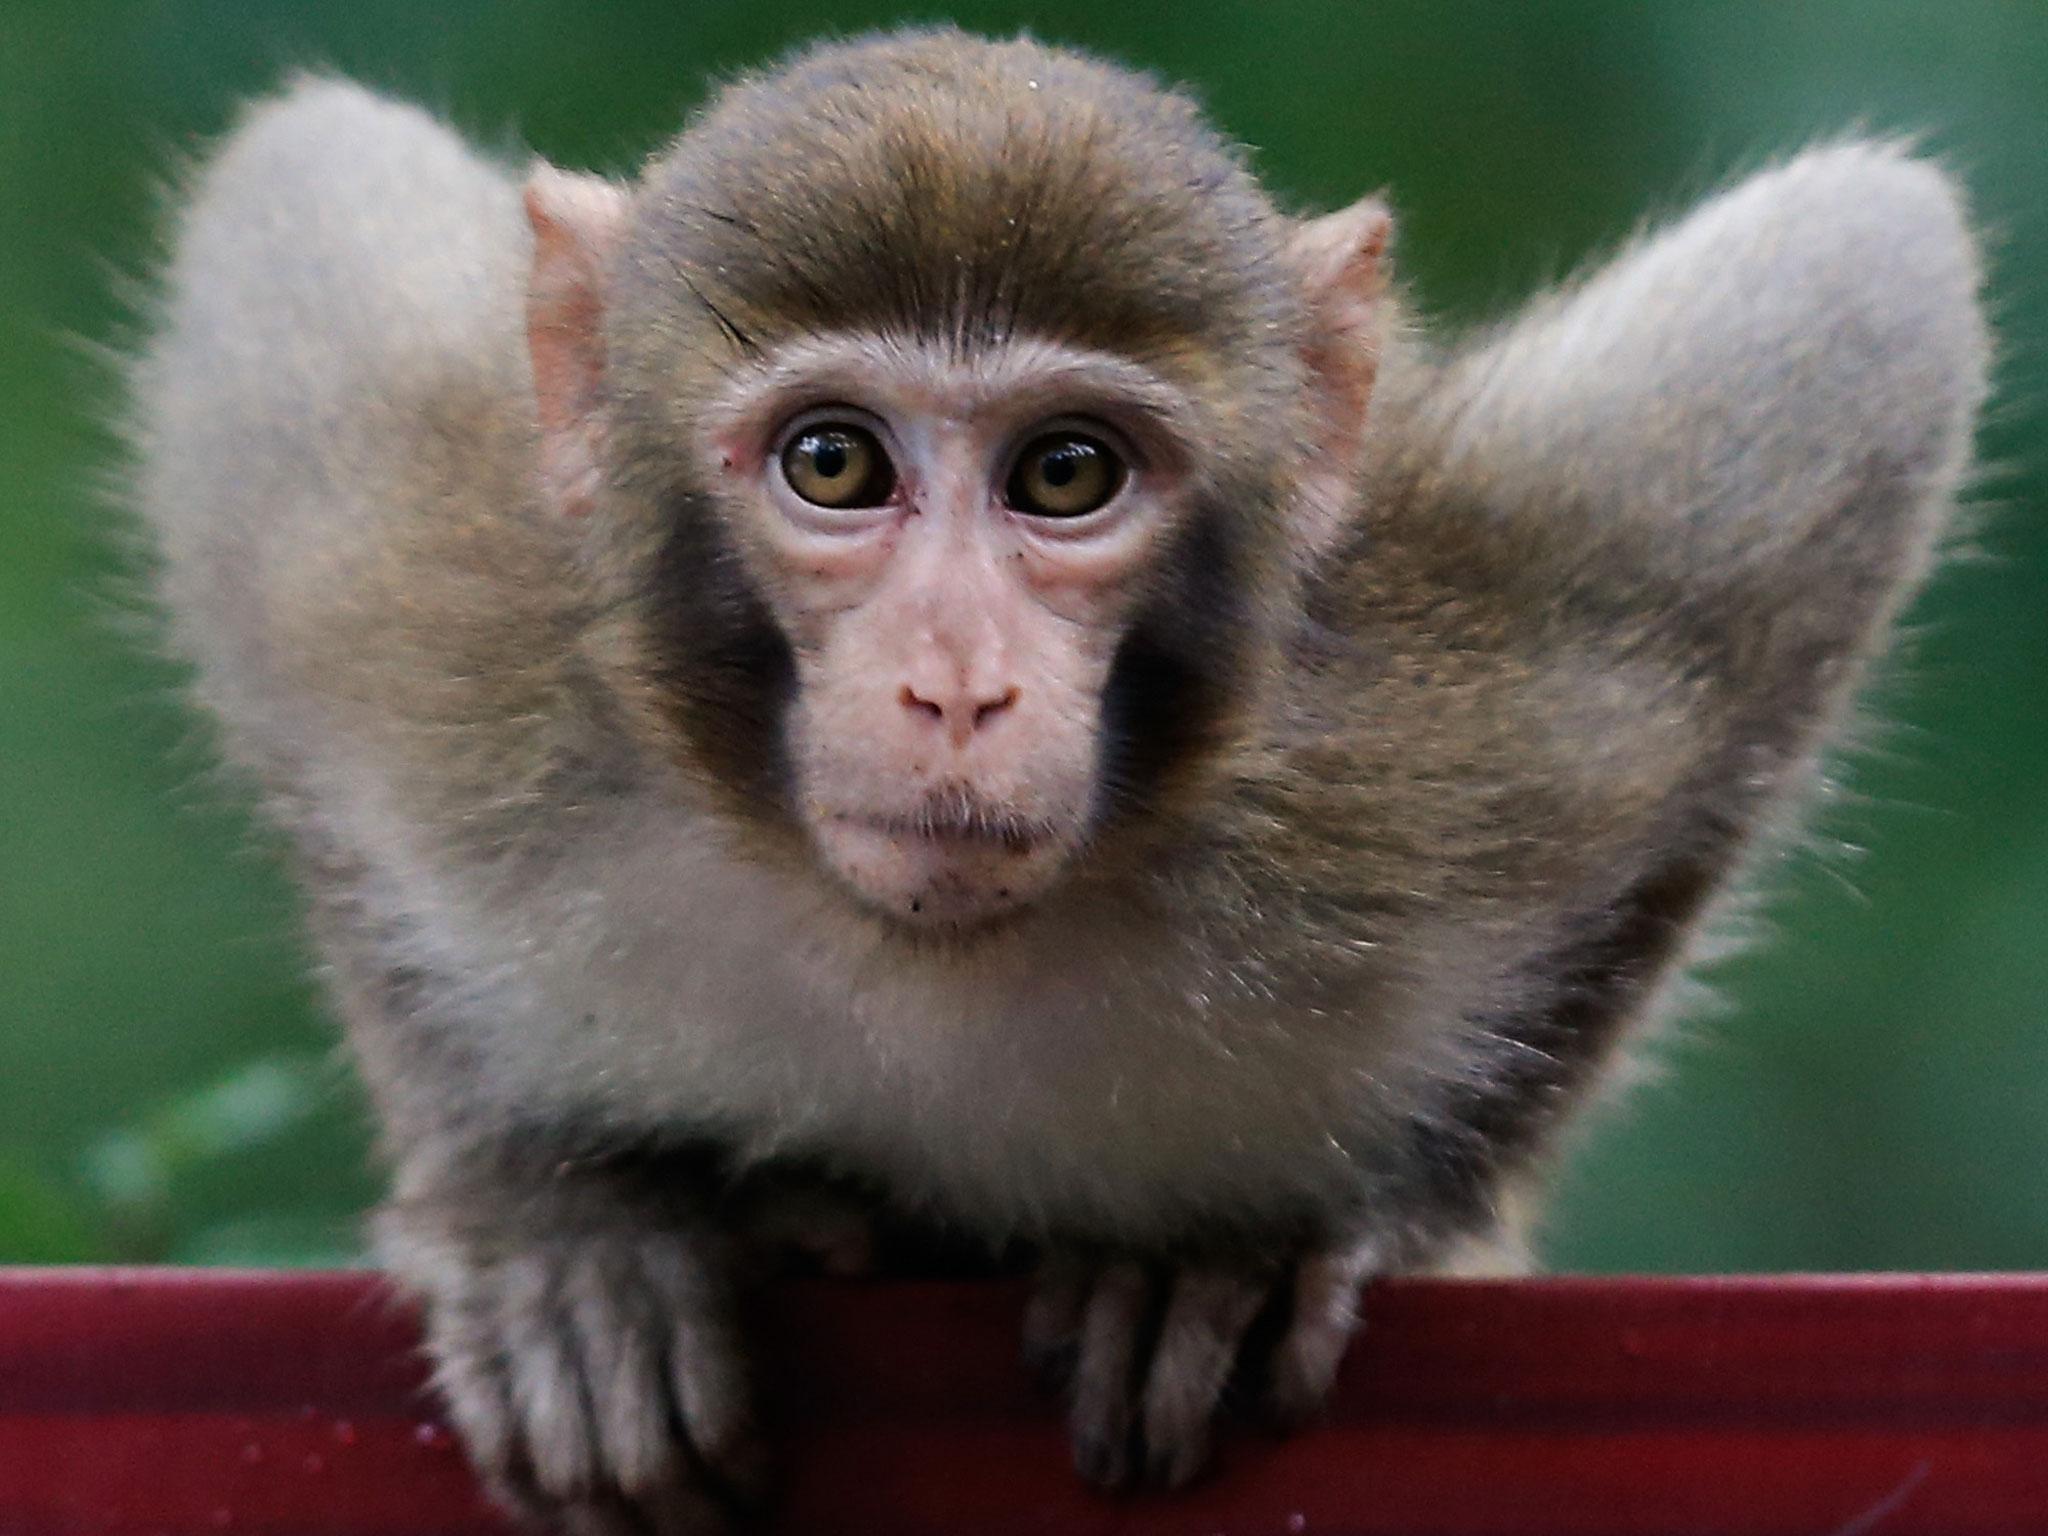 A macaque monkey, unrelated to the study, plays in China.